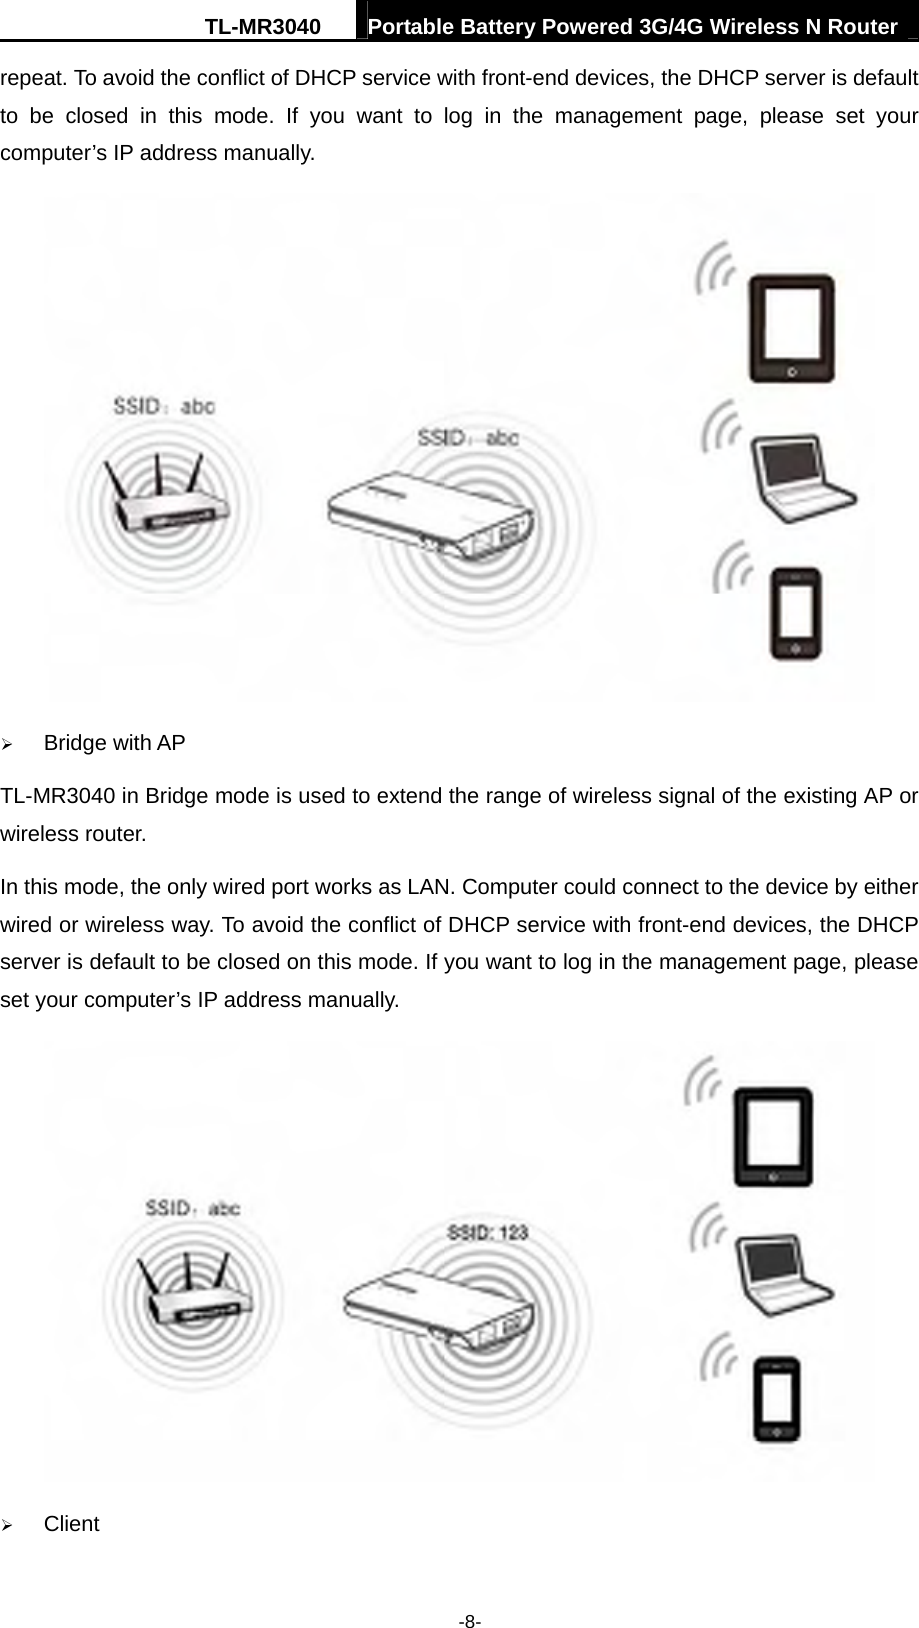 TL-MR3040  Portable Battery Powered 3G/4G Wireless N Router  -8- repeat. To avoid the conflict of DHCP service with front-end devices, the DHCP server is default to be closed in this mode. If you want to log in the management page, please set your computer’s IP address manually.  ¾ Bridge with AP TL-MR3040 in Bridge mode is used to extend the range of wireless signal of the existing AP or wireless router.   In this mode, the only wired port works as LAN. Computer could connect to the device by either wired or wireless way. To avoid the conflict of DHCP service with front-end devices, the DHCP server is default to be closed on this mode. If you want to log in the management page, please set your computer’s IP address manually.  ¾ Client 